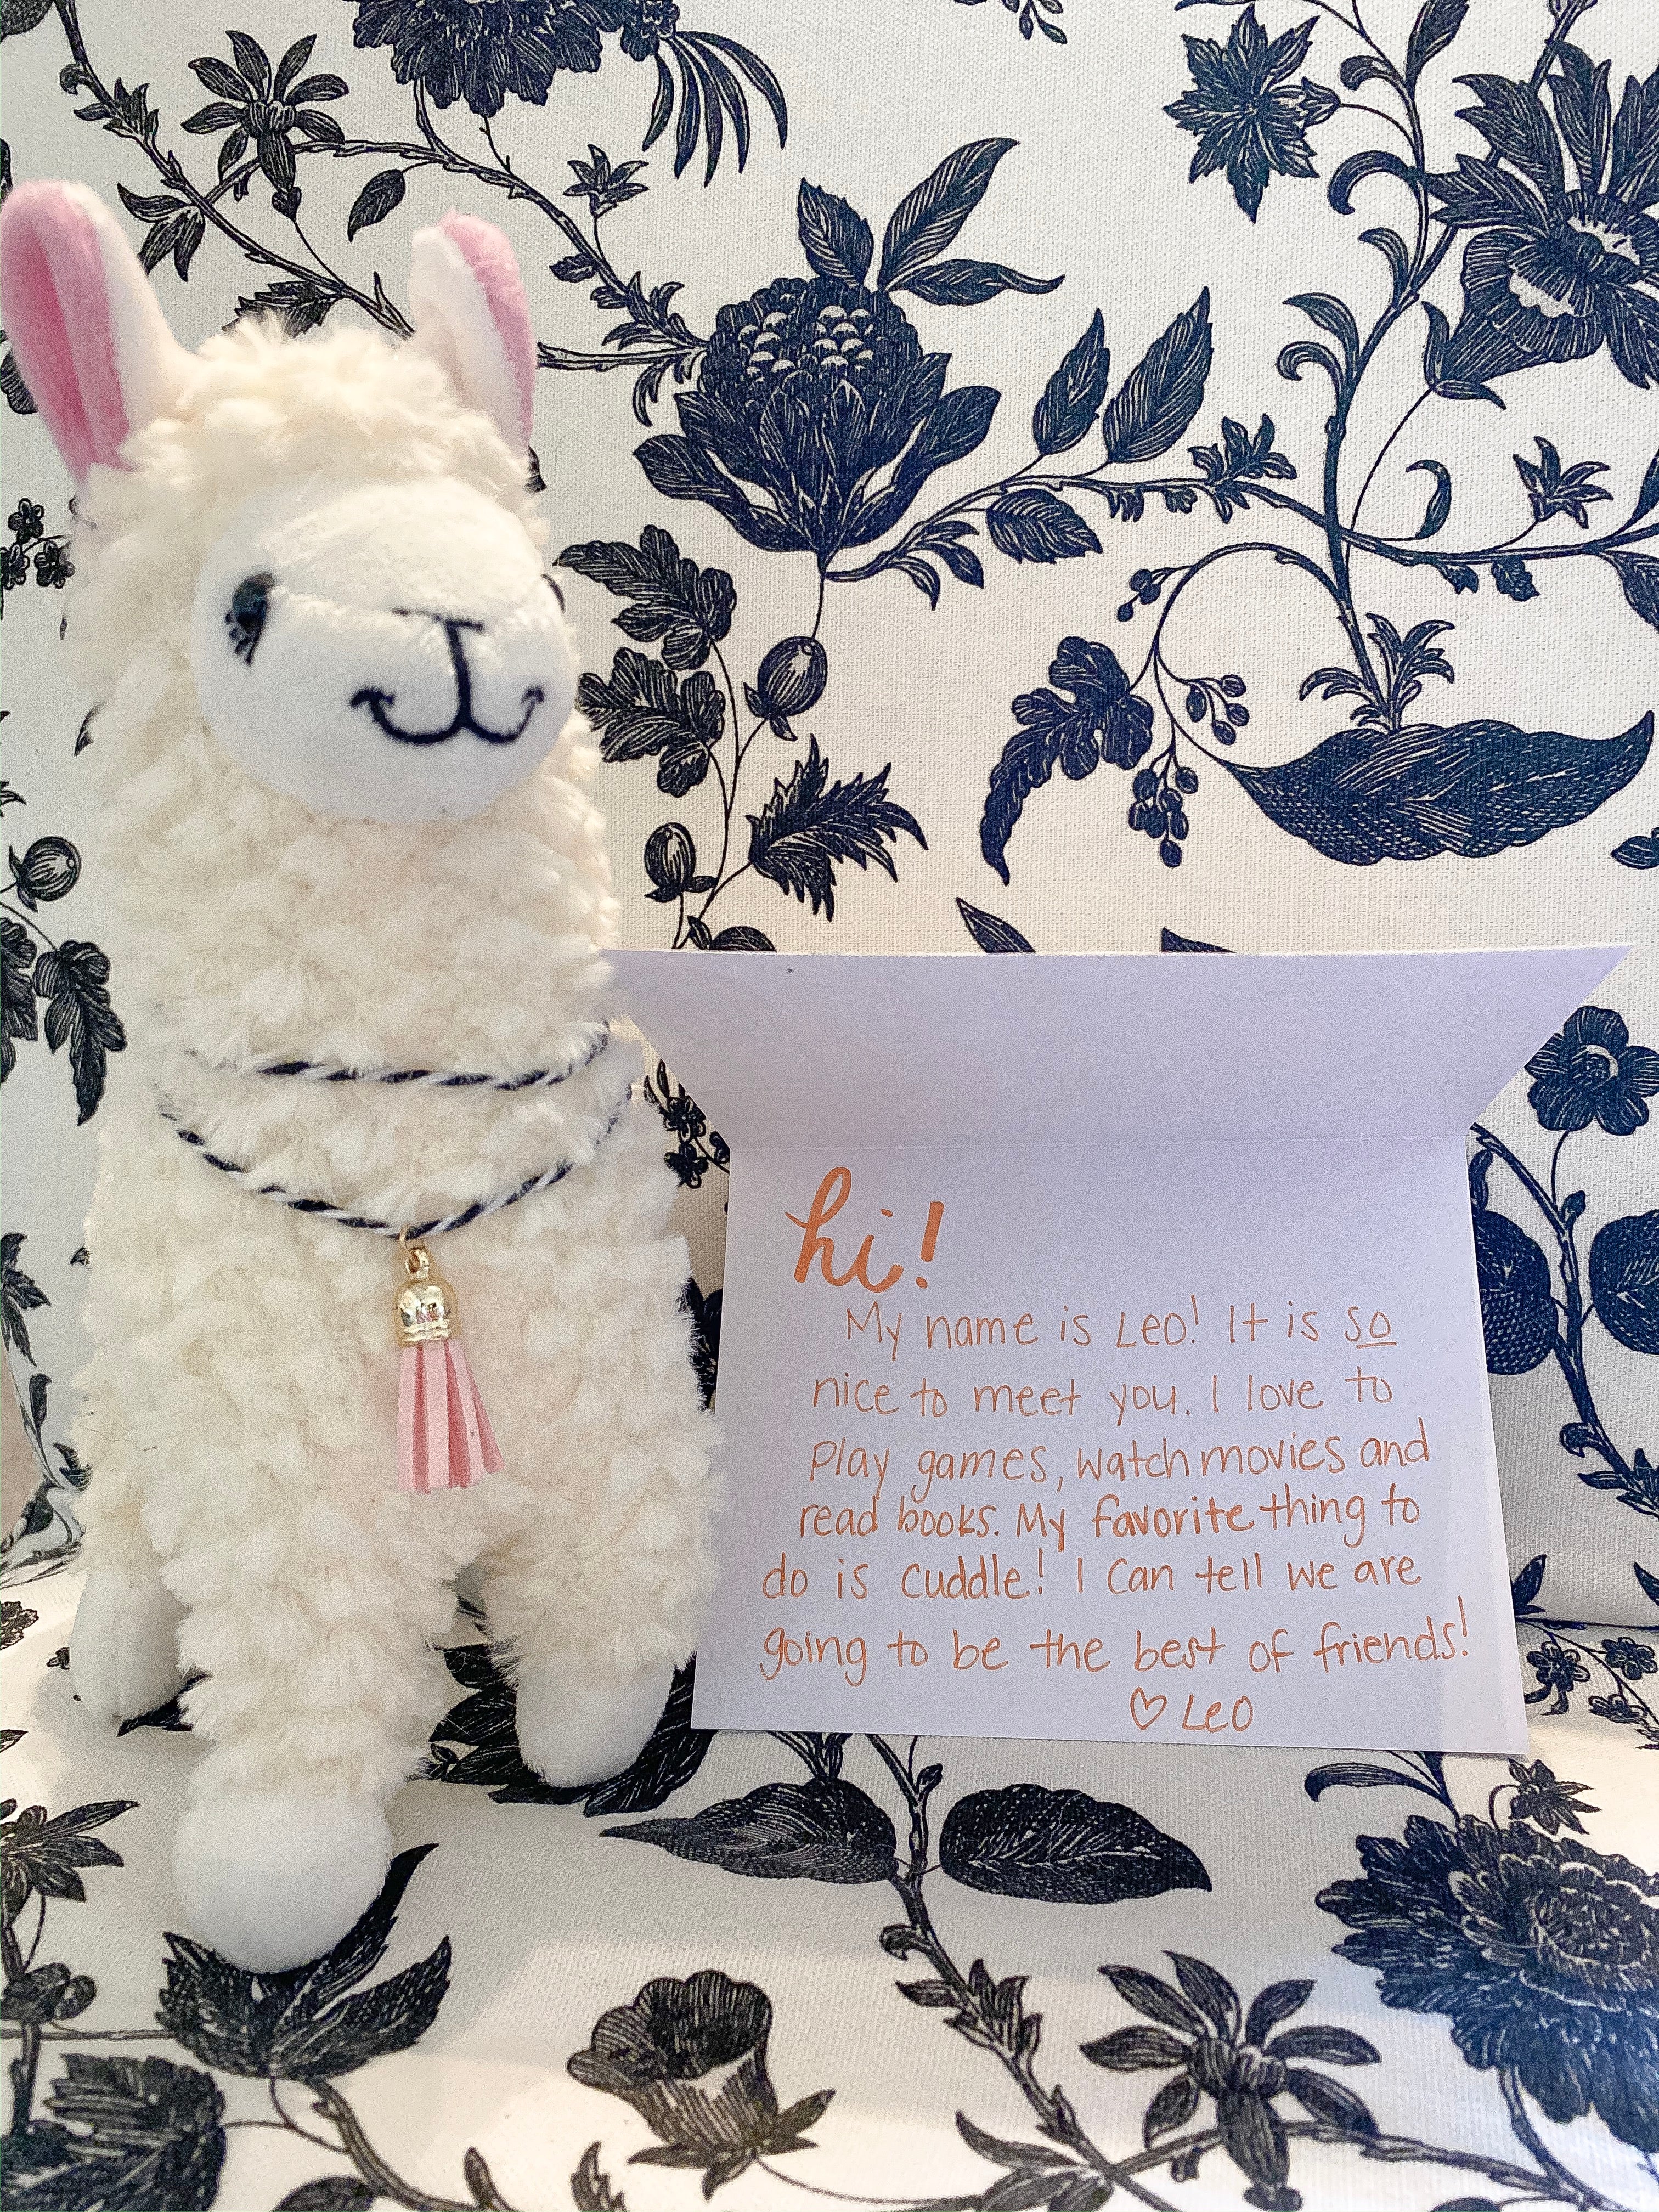 An example of a note that you could send to a llama lover!